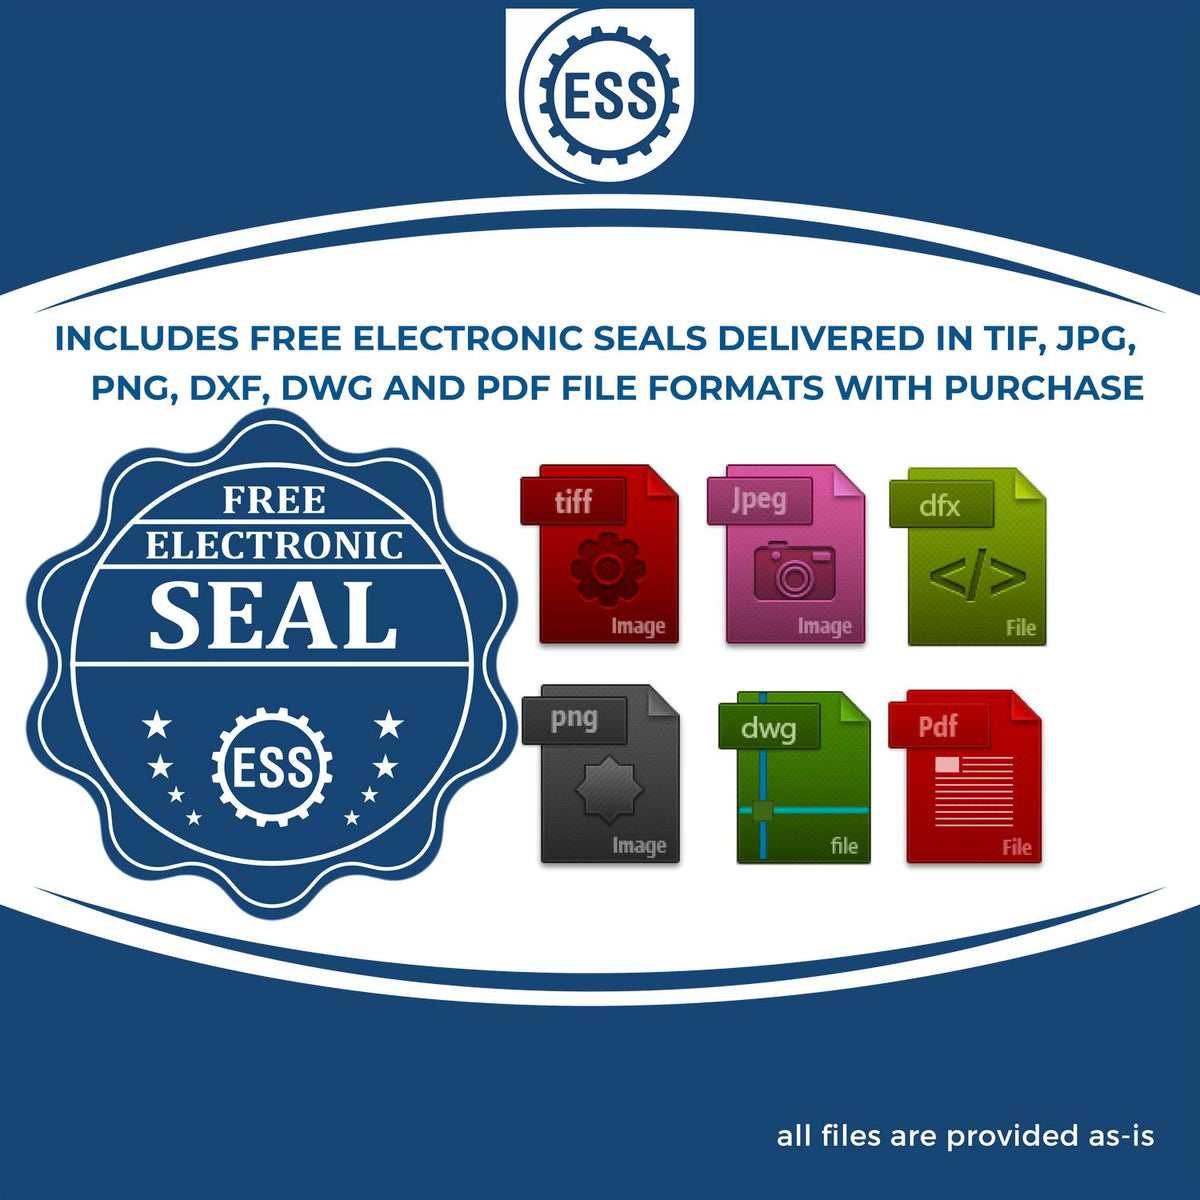 An infographic for the free electronic seal for the Self-Inking Rhode Island Landscape Architect Stamp illustrating the different file type icons such as DXF, DWG, TIF, JPG and PNG.